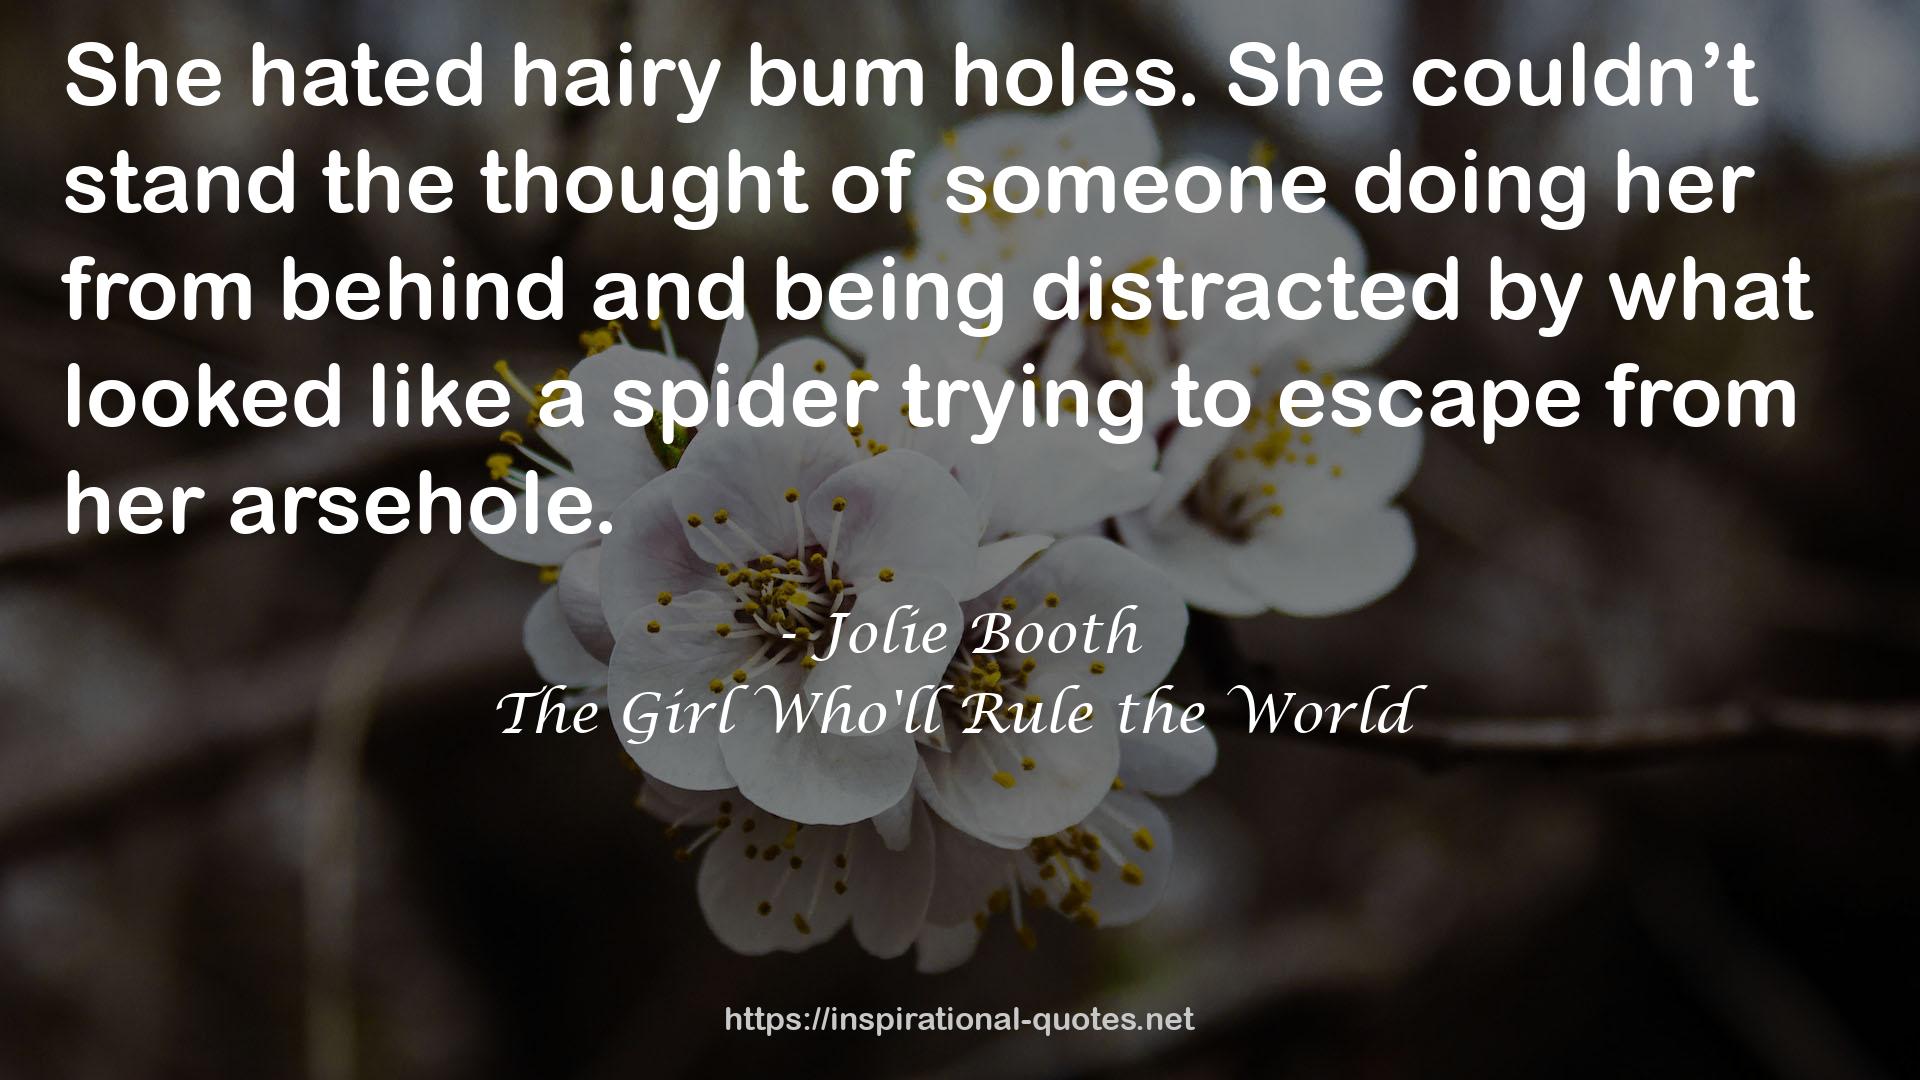 The Girl Who'll Rule the World QUOTES